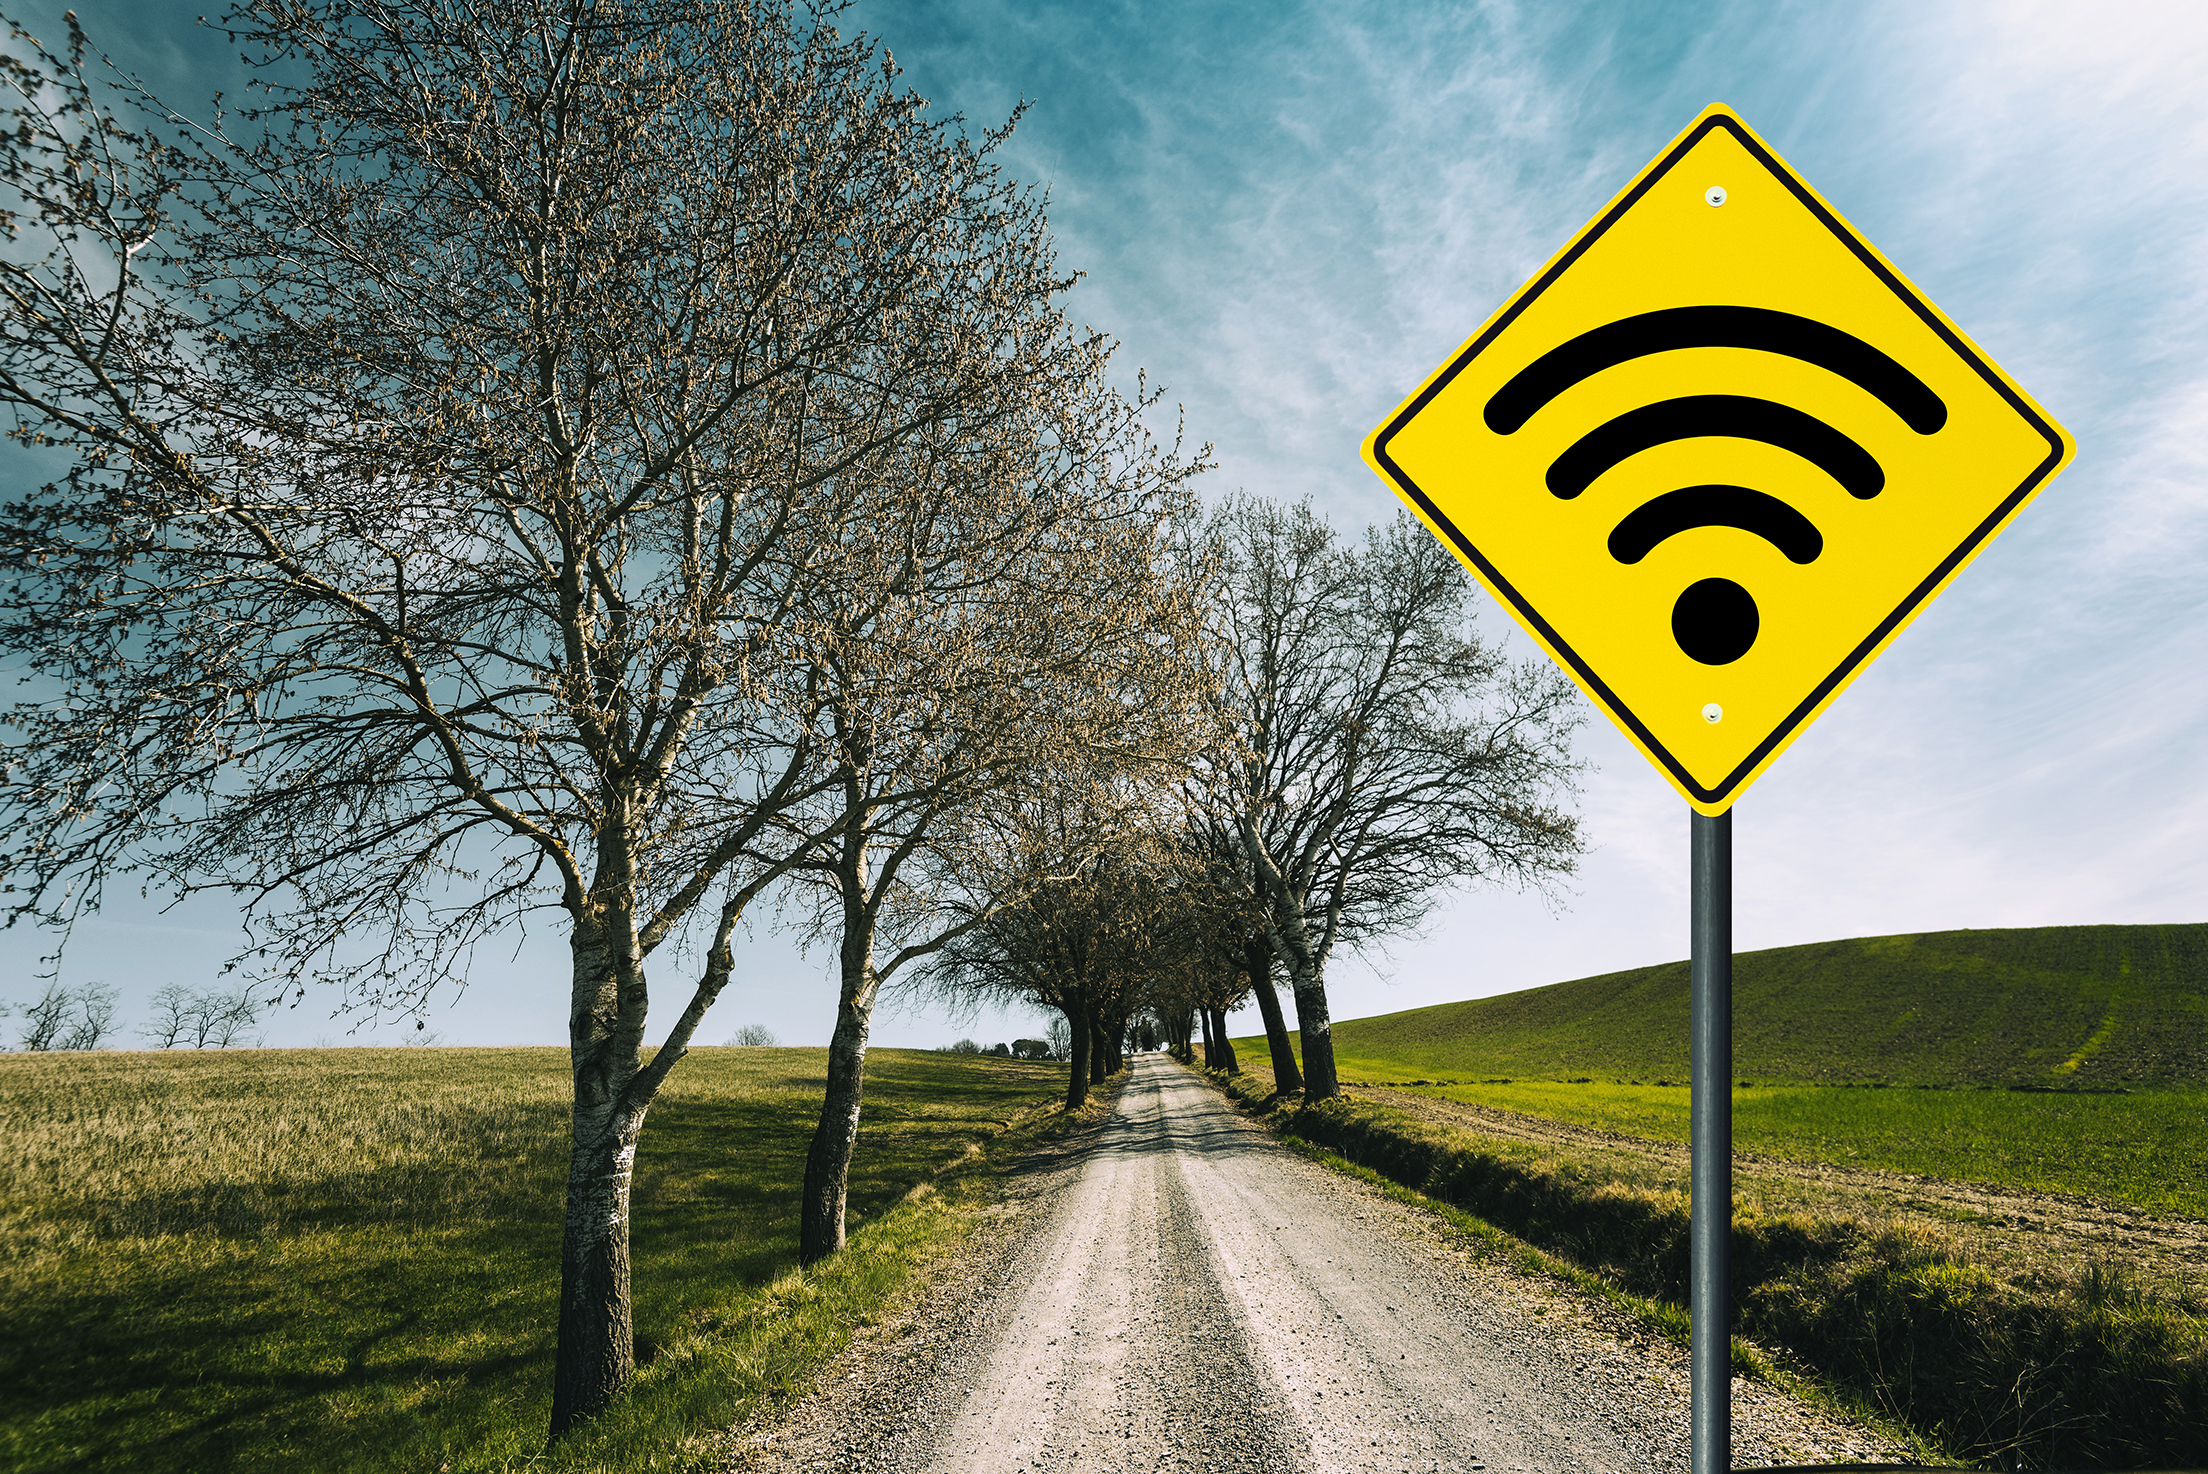 A rural road with a yellow road sign featuring a Wifi signal symbol.